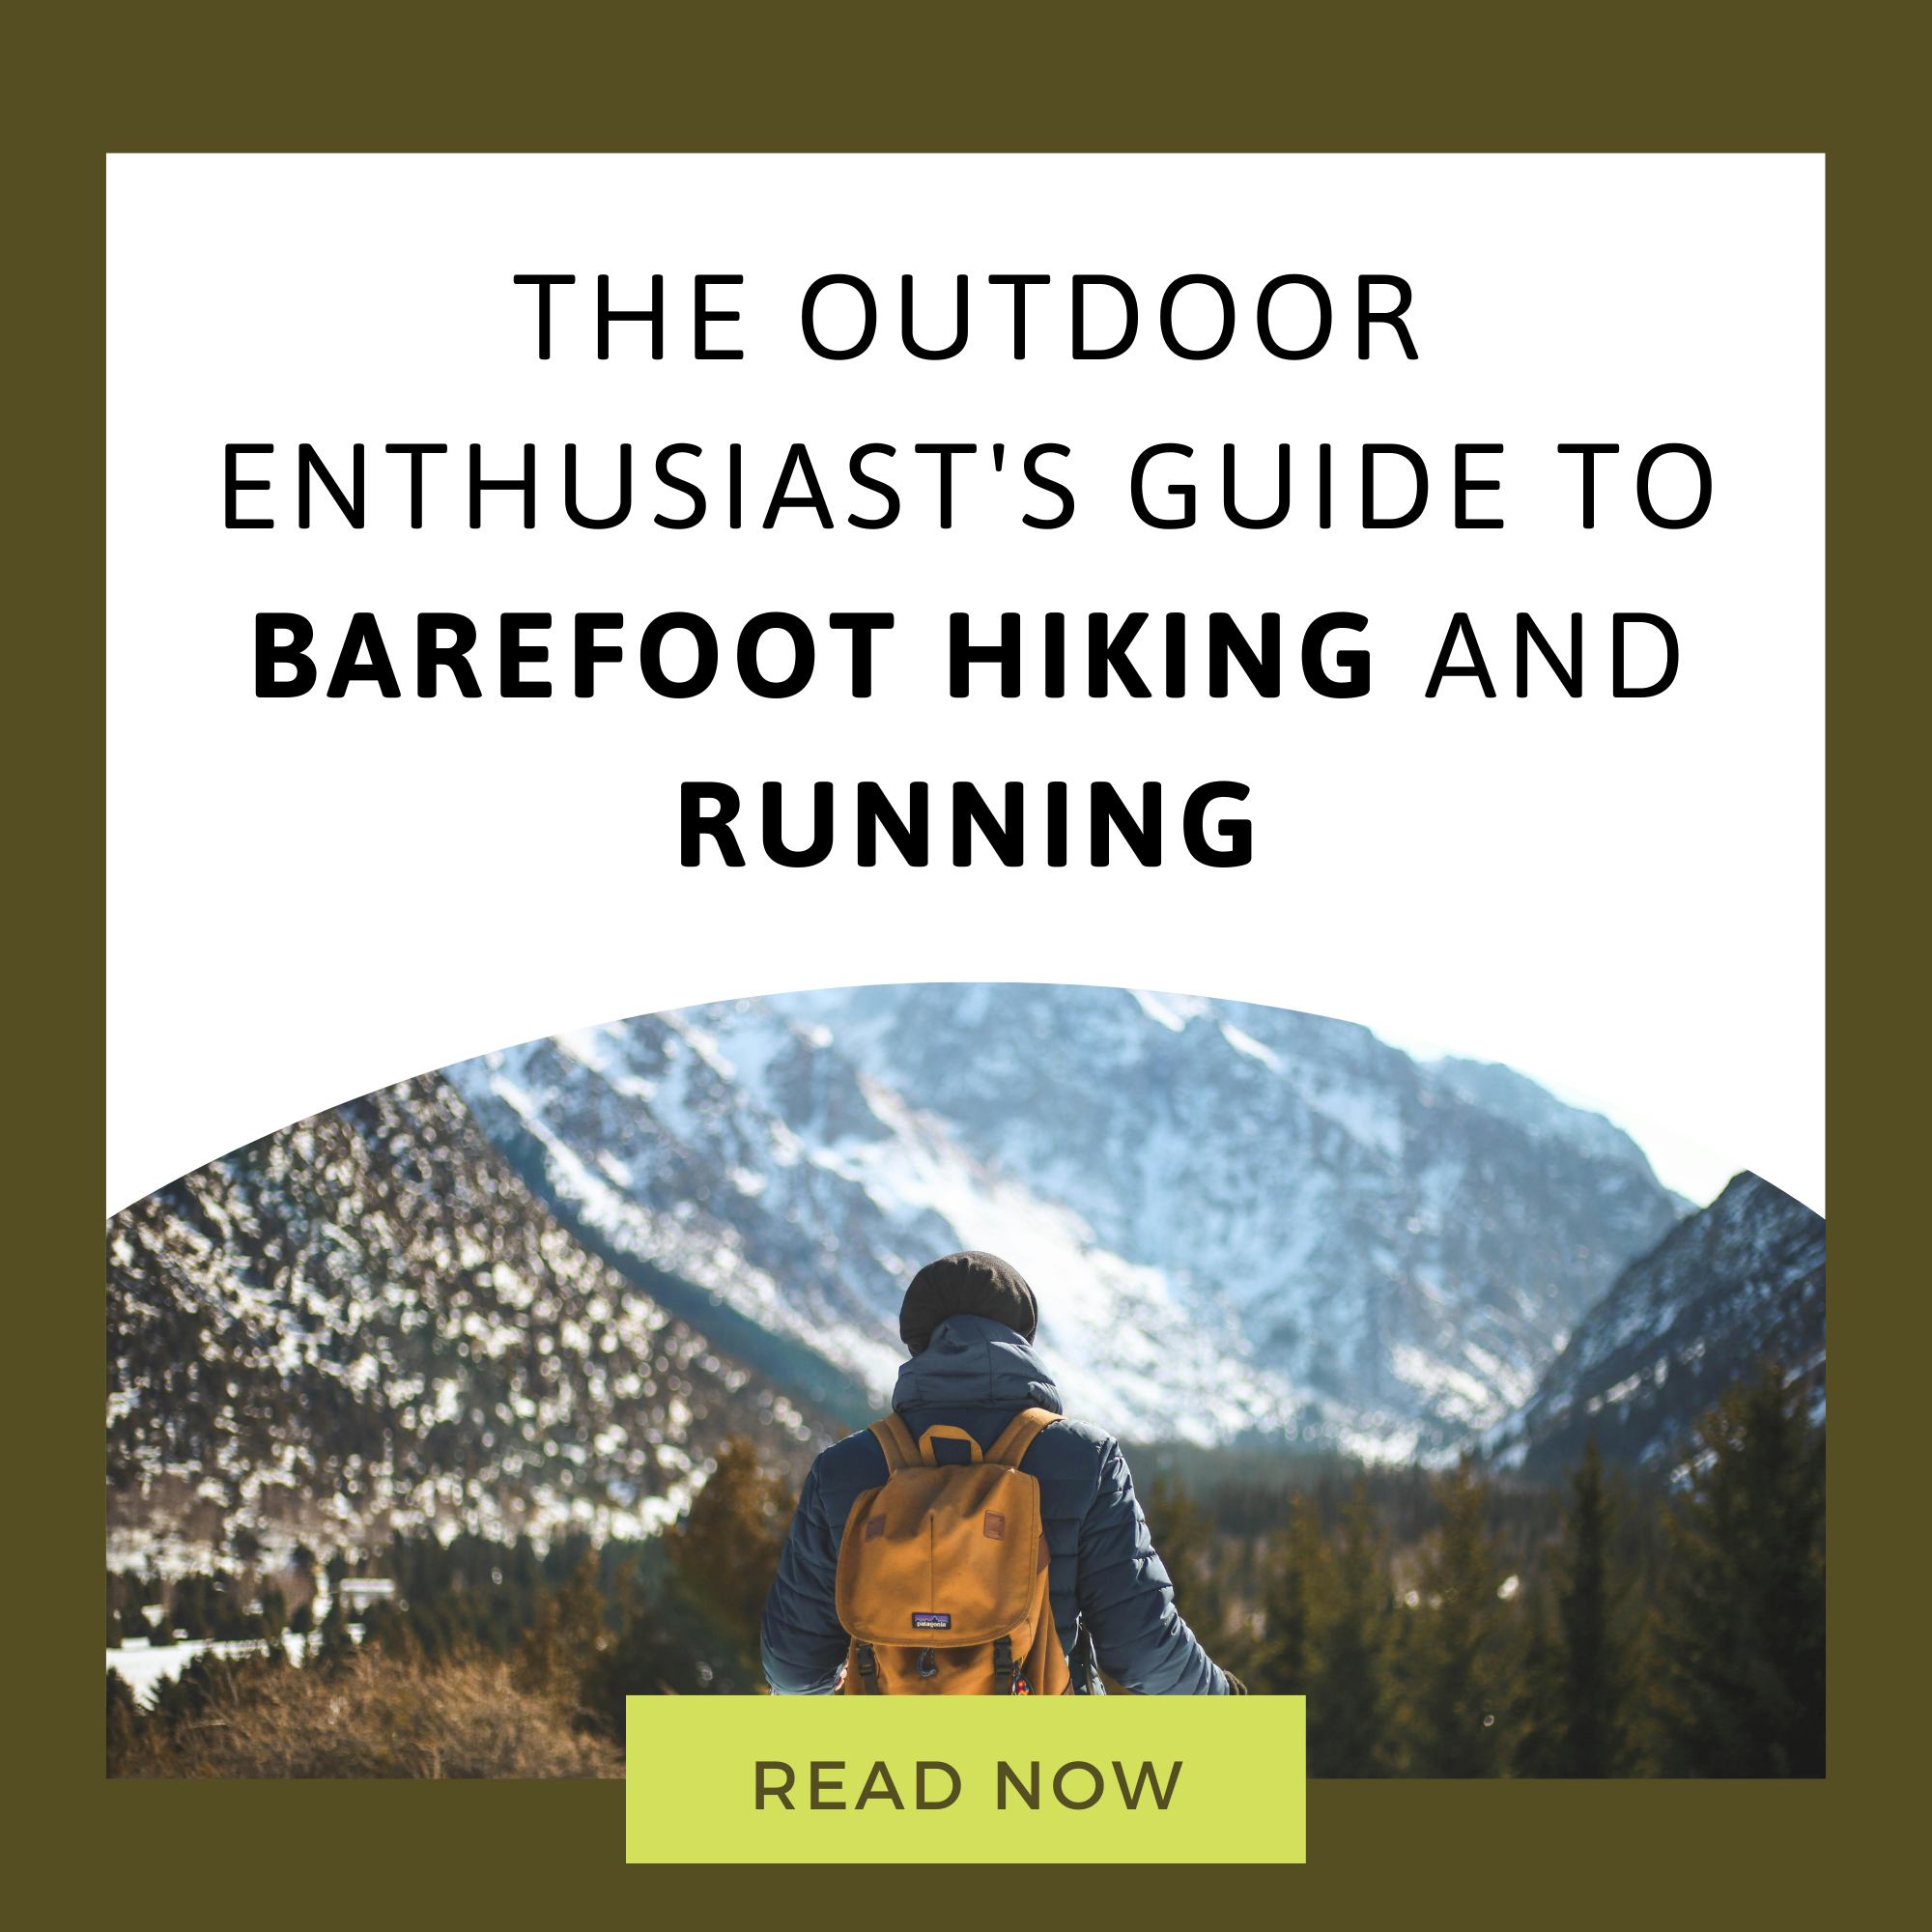 The Outdoor Enthusiast's Guide to Barefoot Hiking and Running